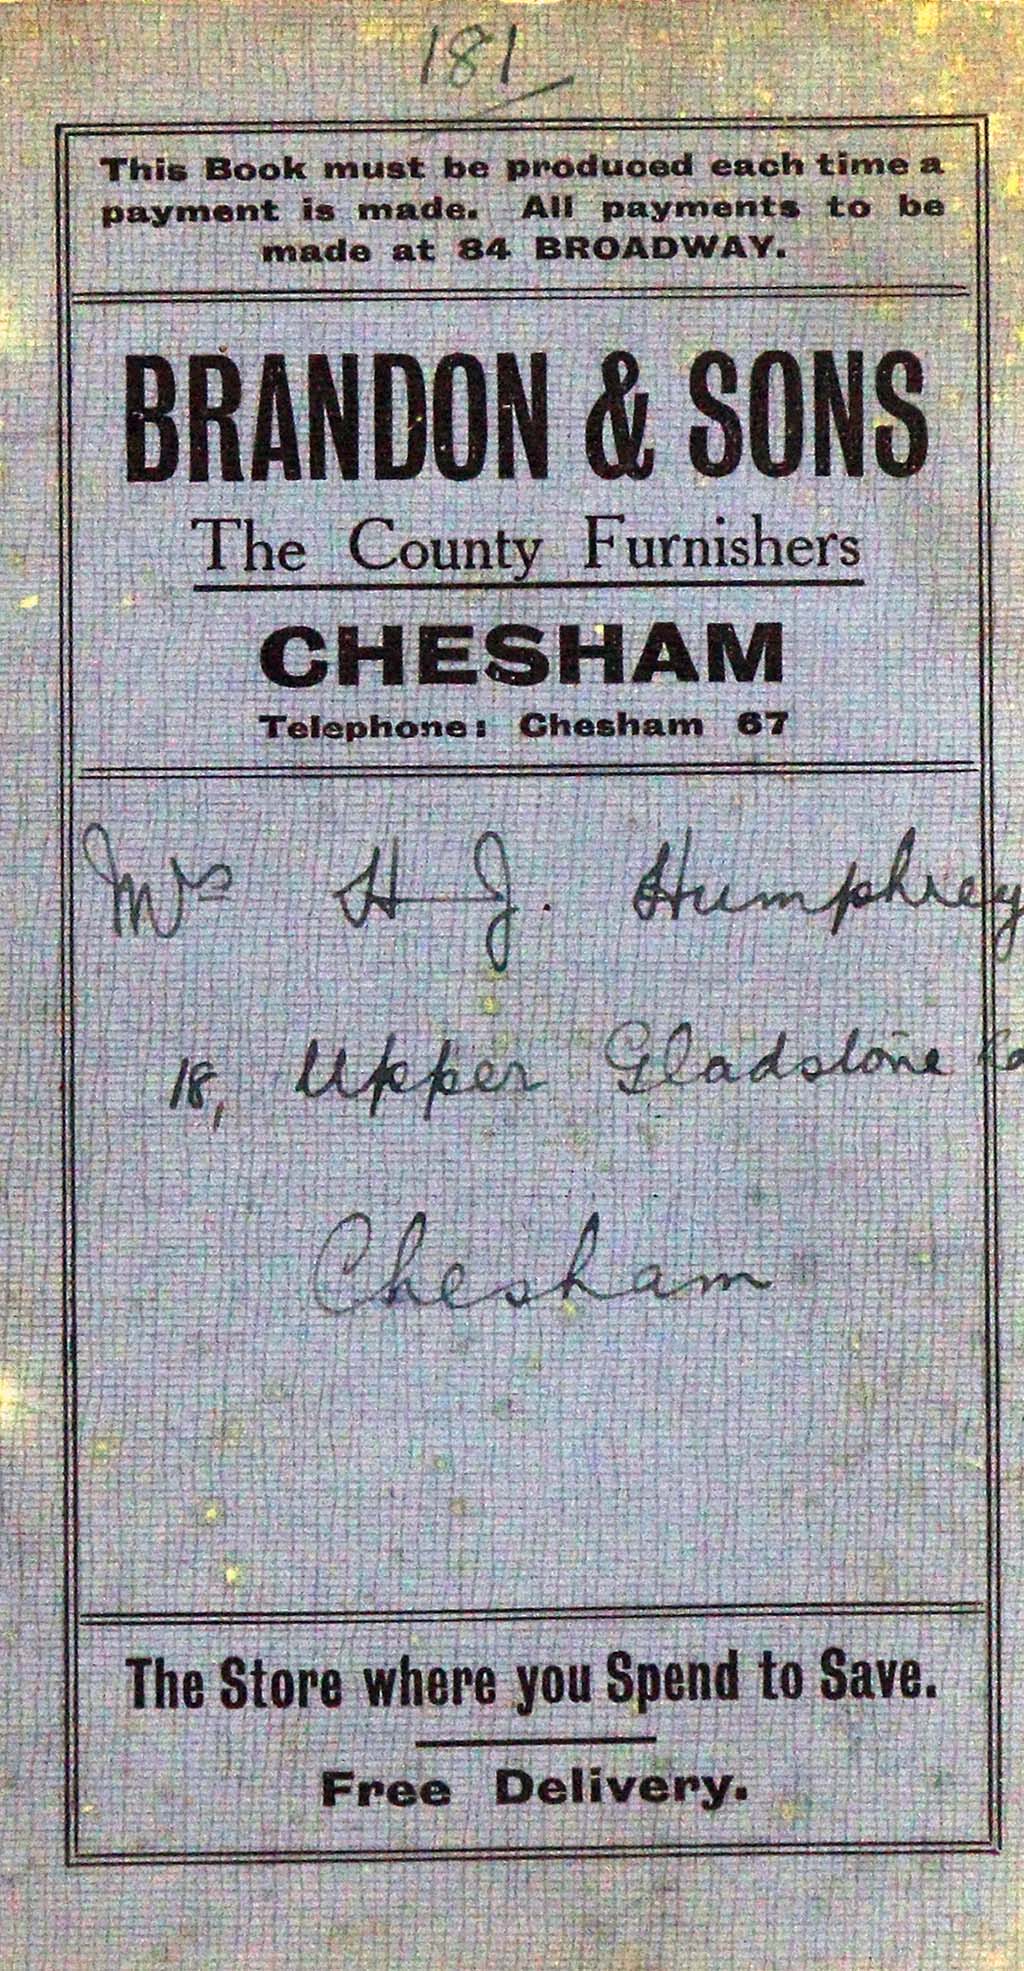 Brandon & Sons The County Furnishers with handwritten name and address of Mrs Humphrey, 18 Upper Gladstone Rd